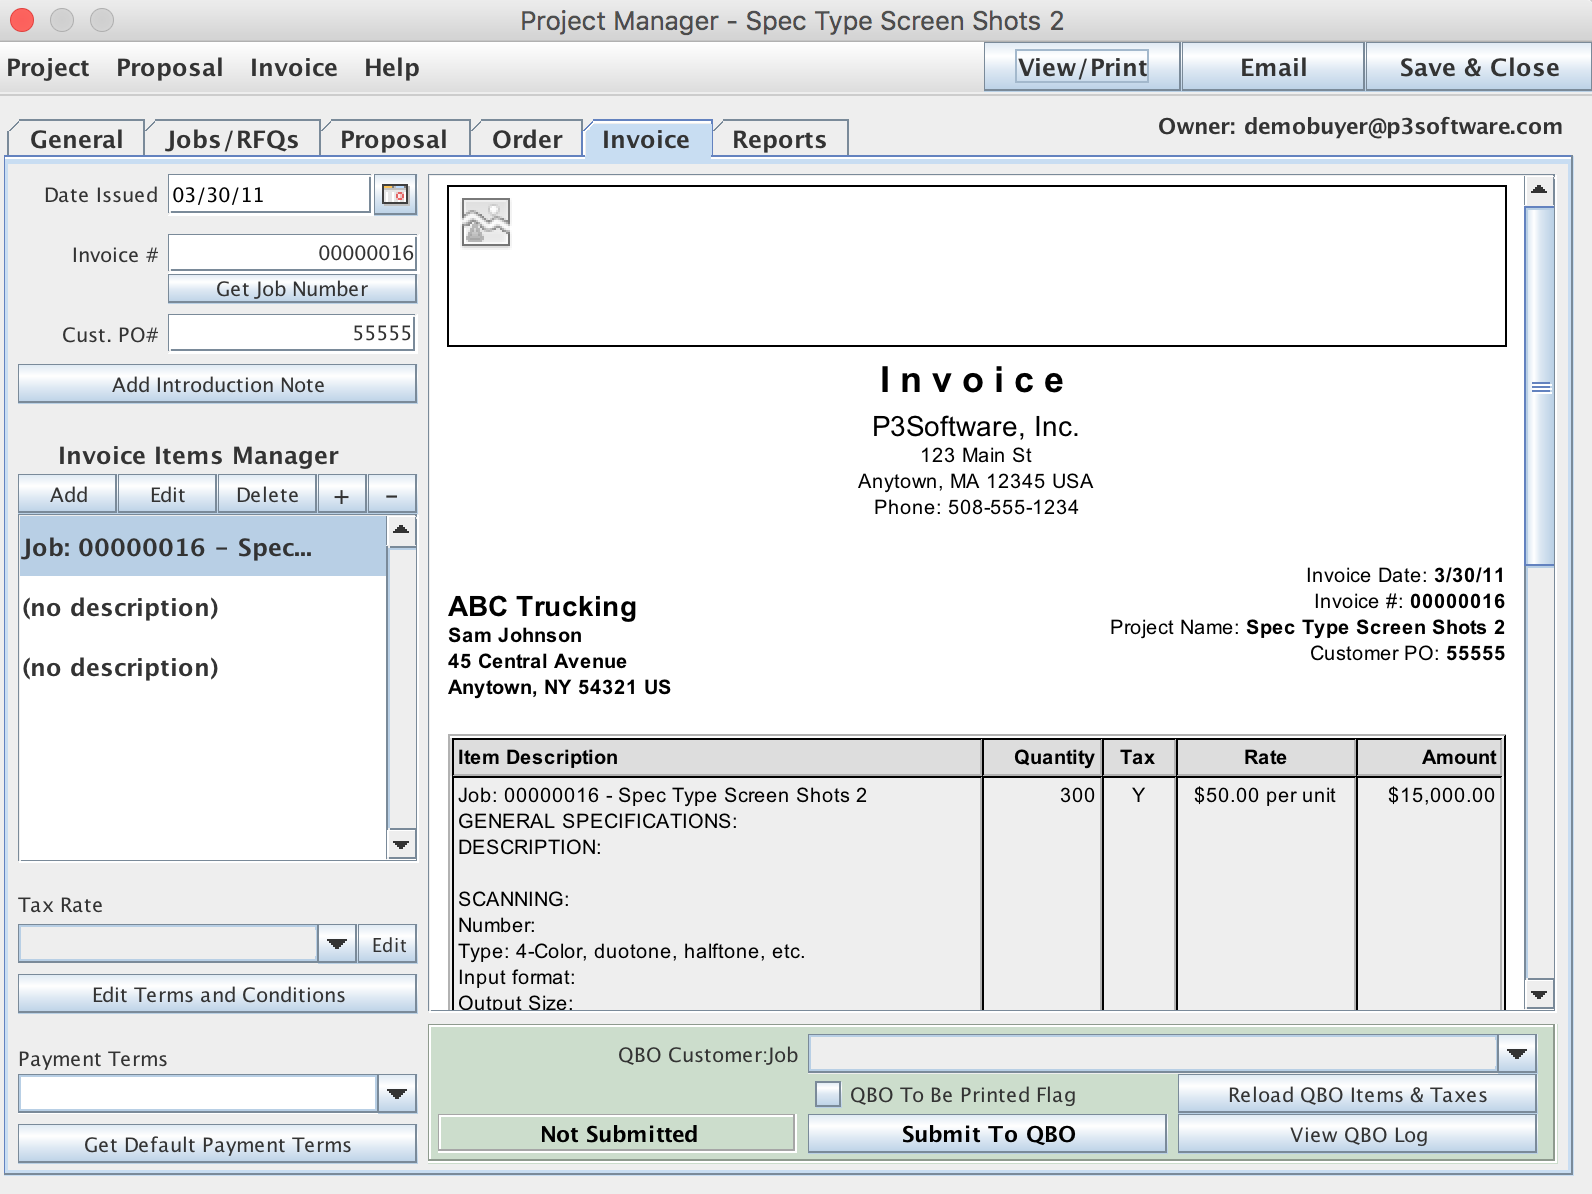 Project Manager Window with the QuickBooks Customer information